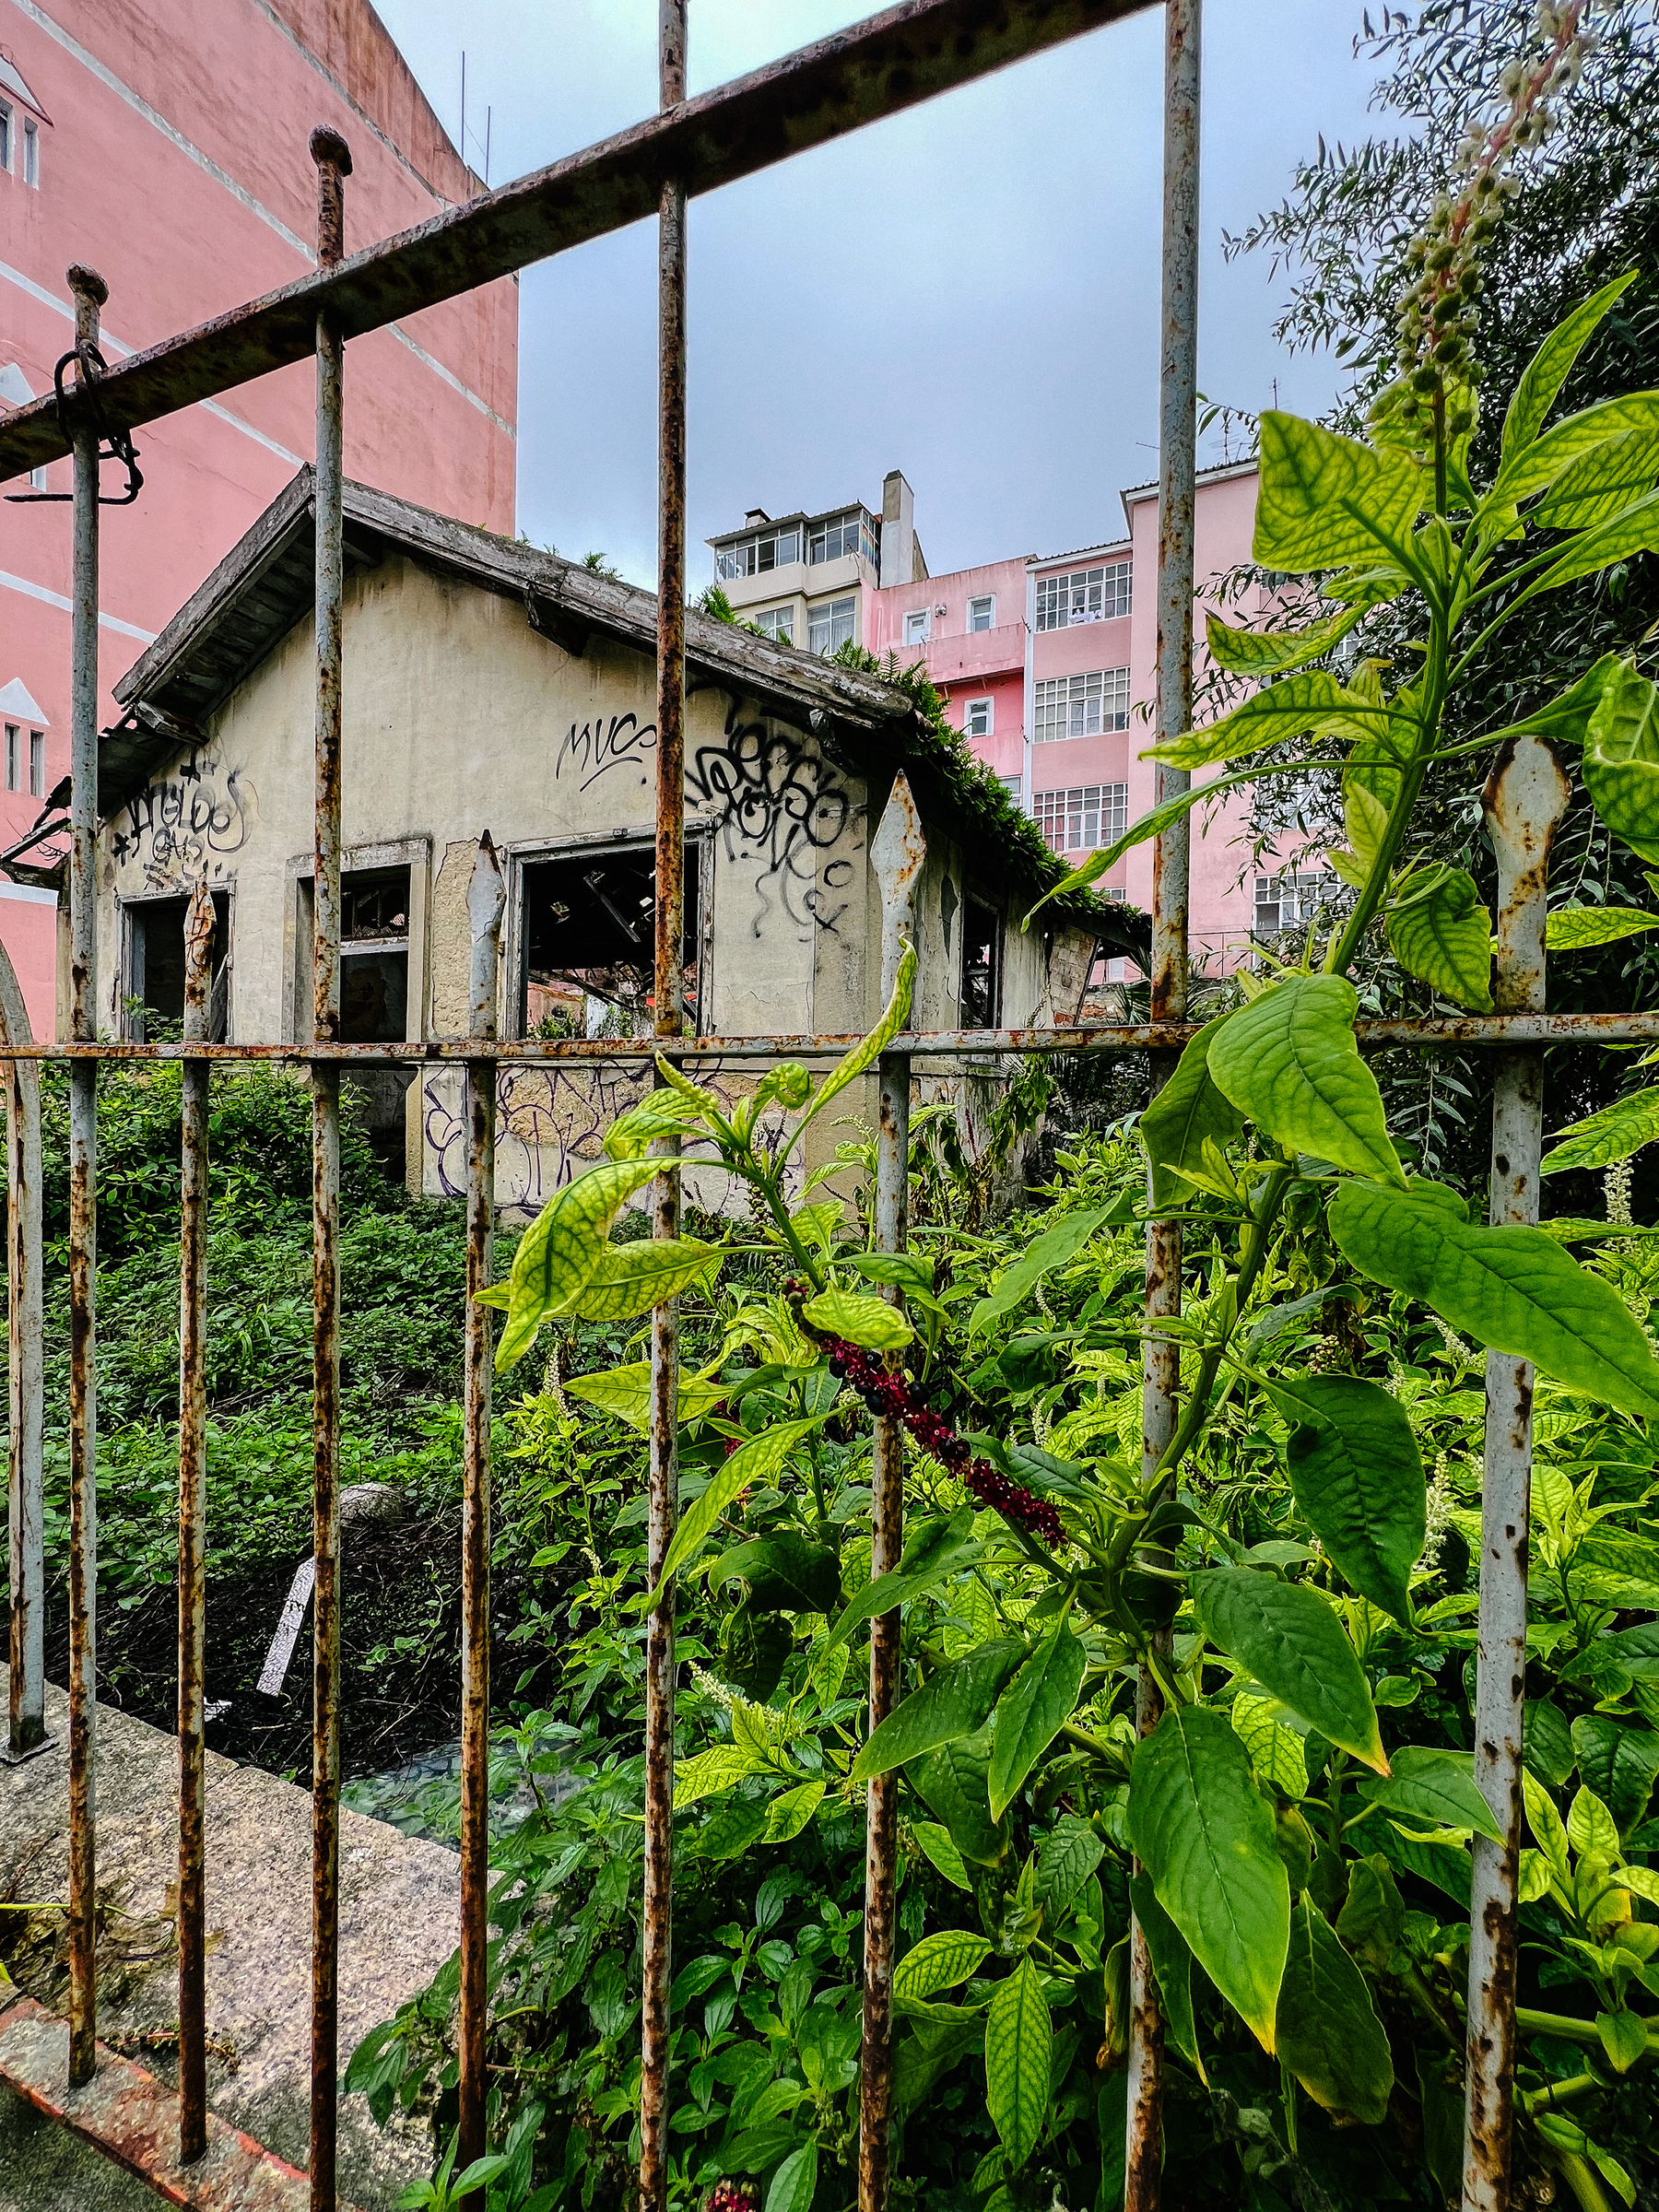 An abandoned house, with an iron fence and weed growing everywhere